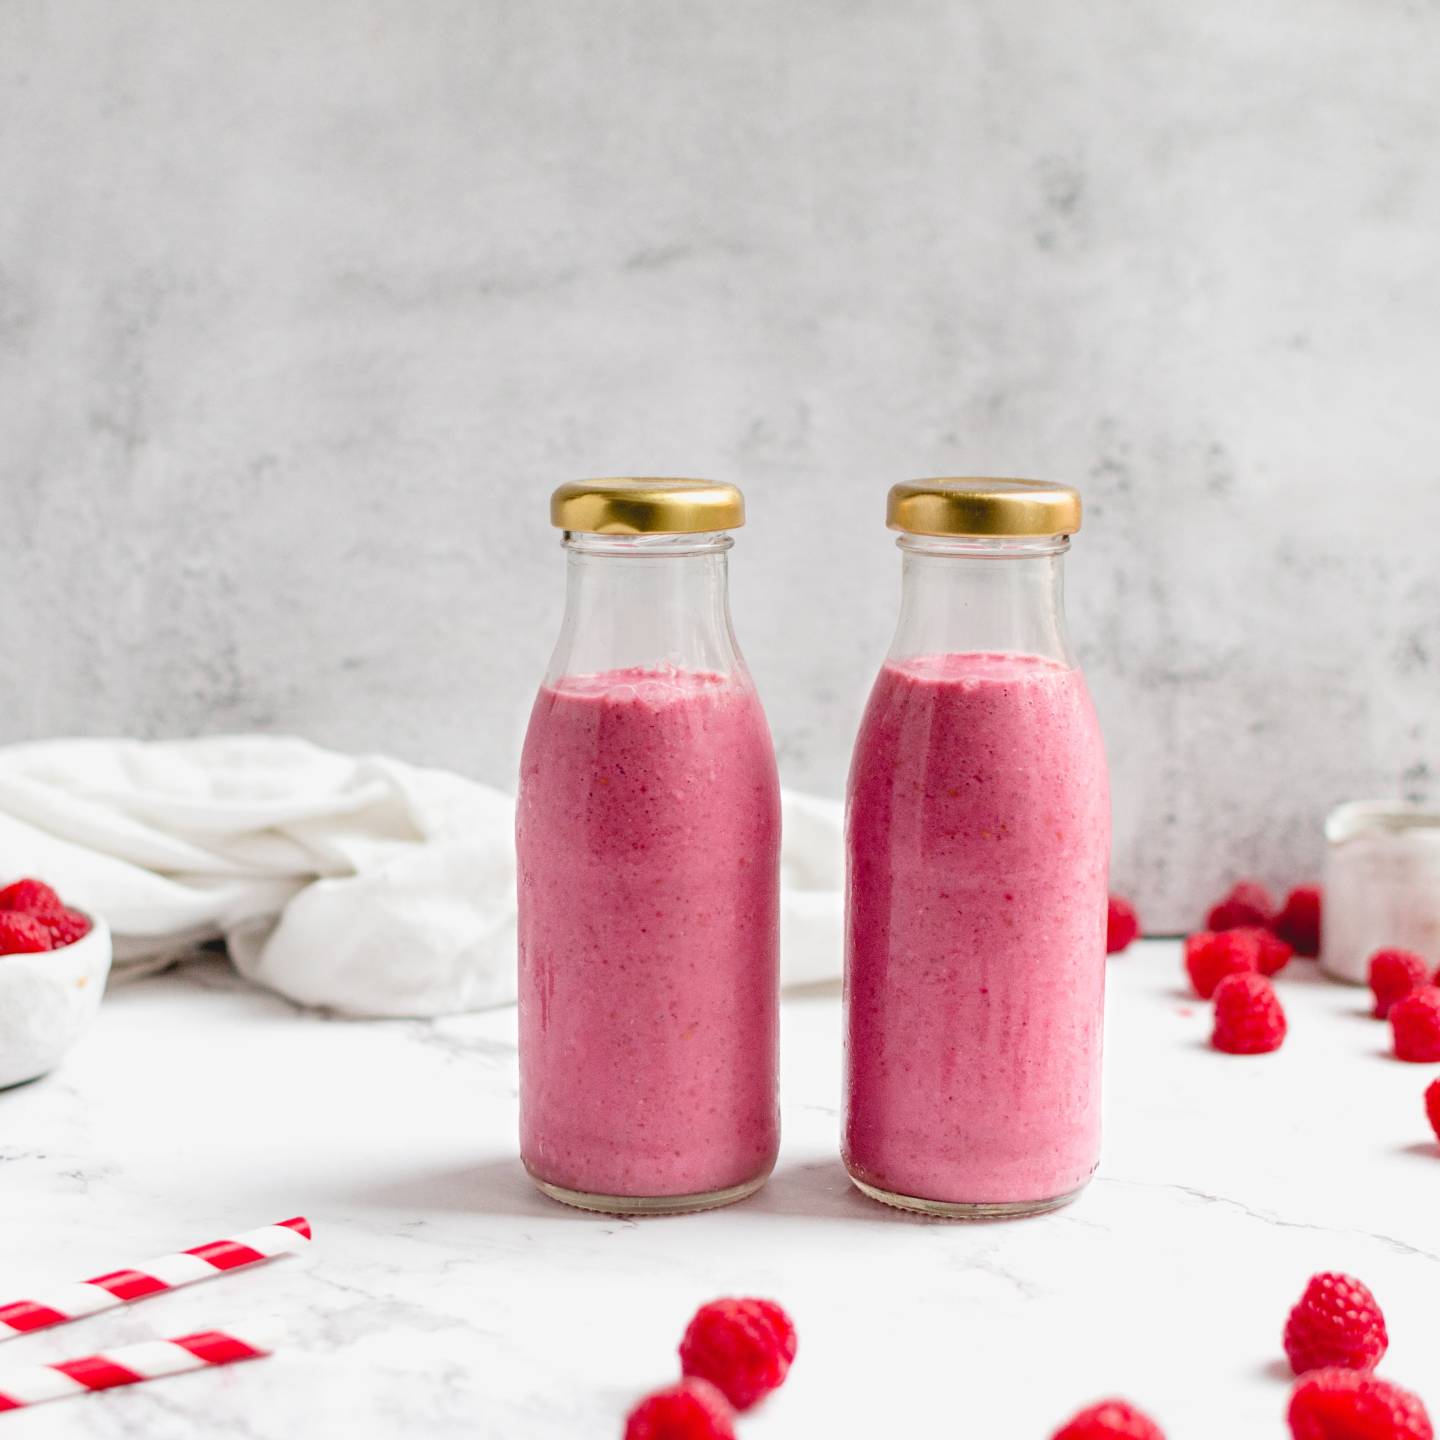 Raspberry chia smoothie with raspberries, chia seeds, almond butter, and almond milk in two glass bottles.